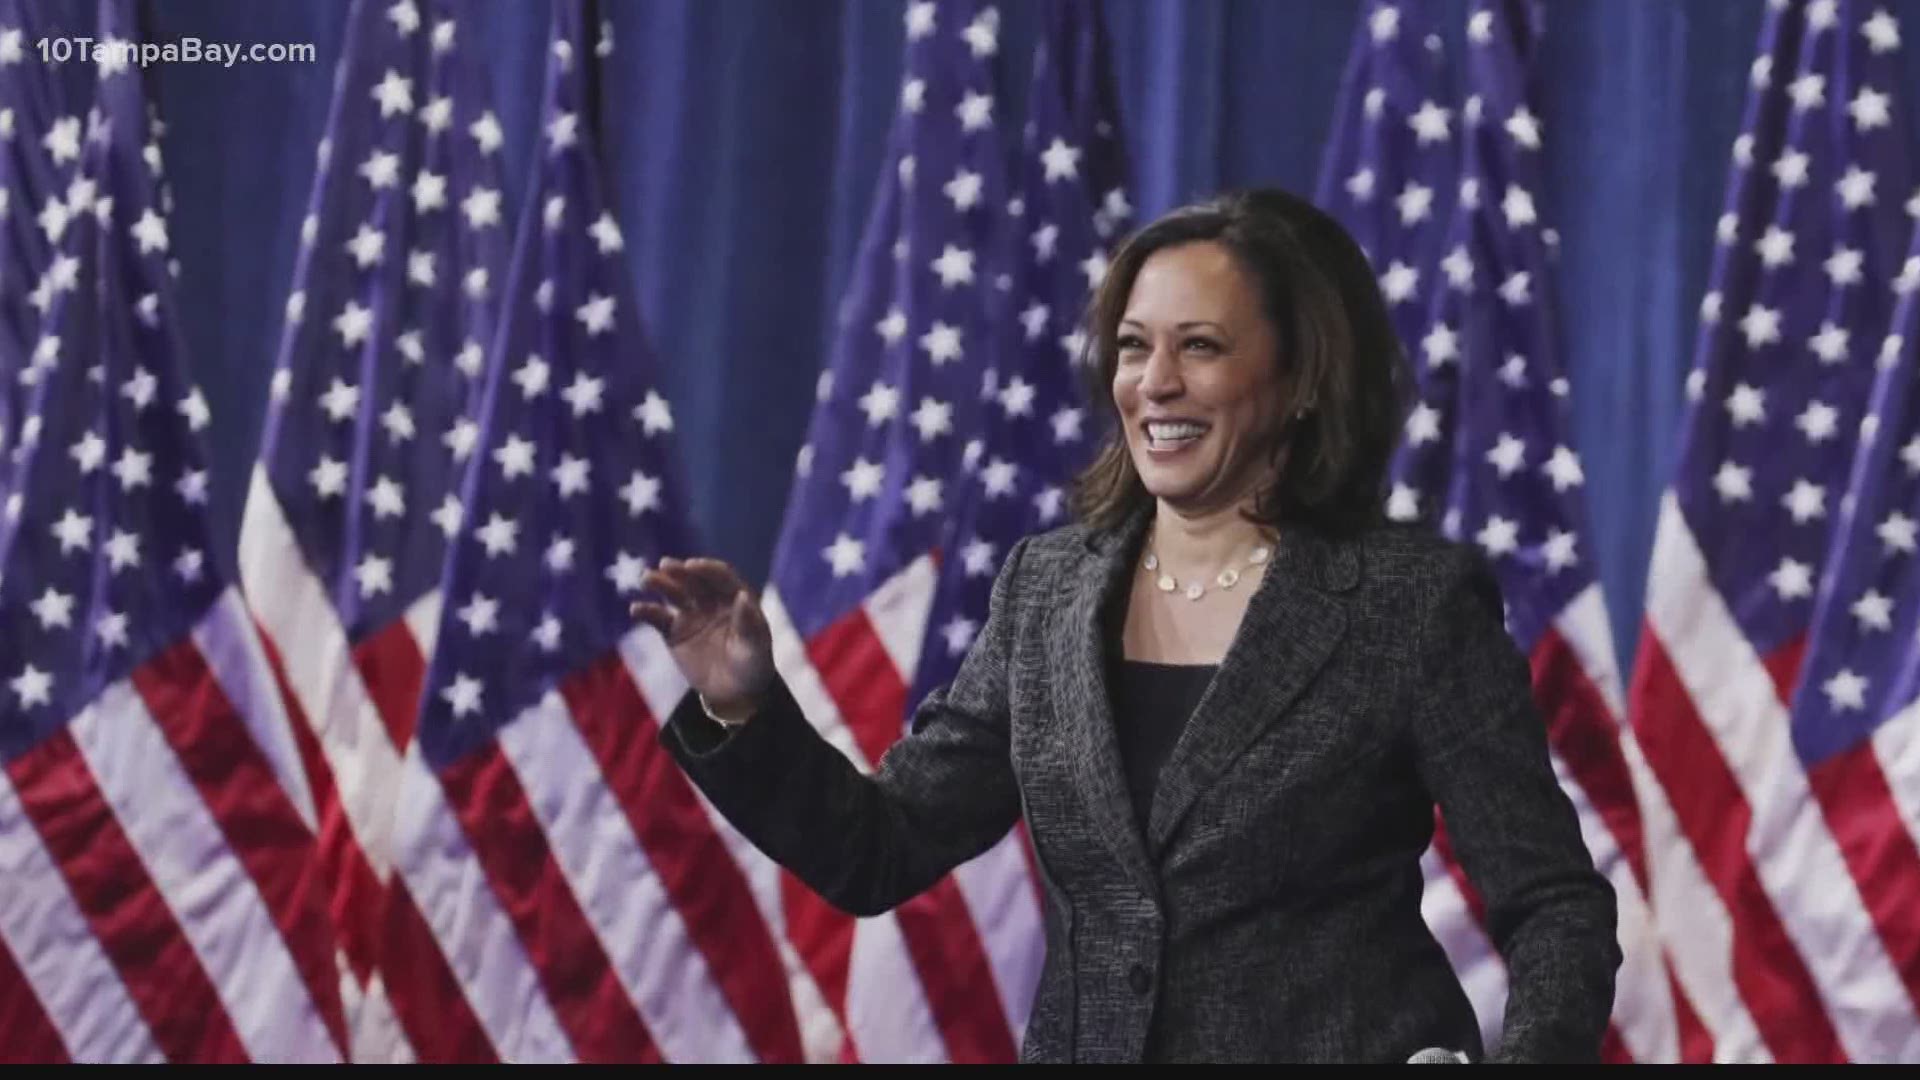 Democrats hope Harris will motivate voters. Here's where she stands on some issues important to Florida.